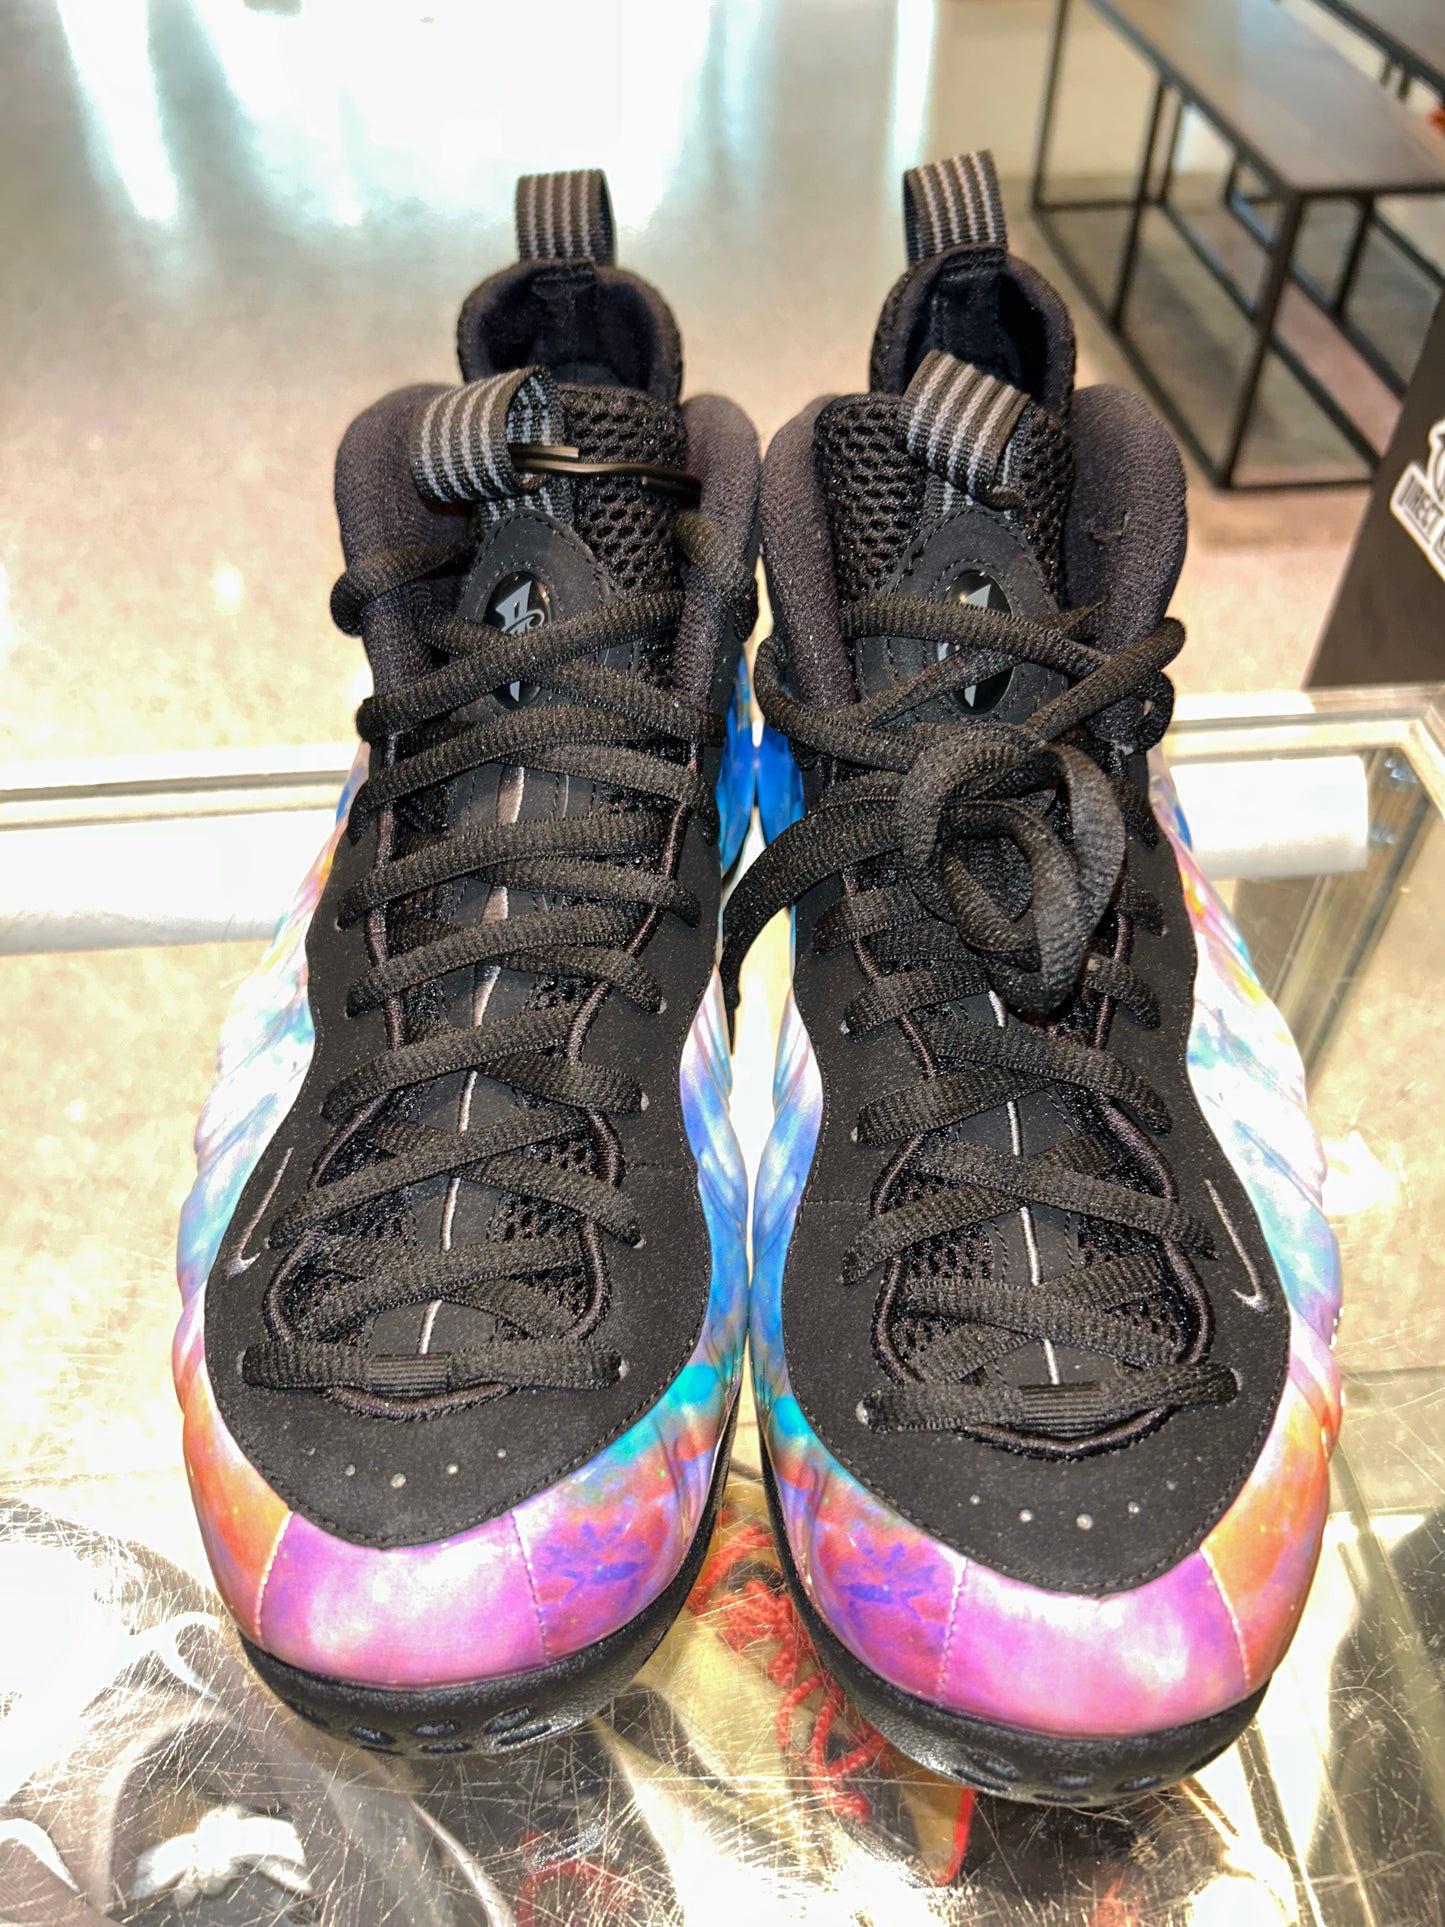 Size 11 Foamposite One “Big Bang” Brand New (Mall)